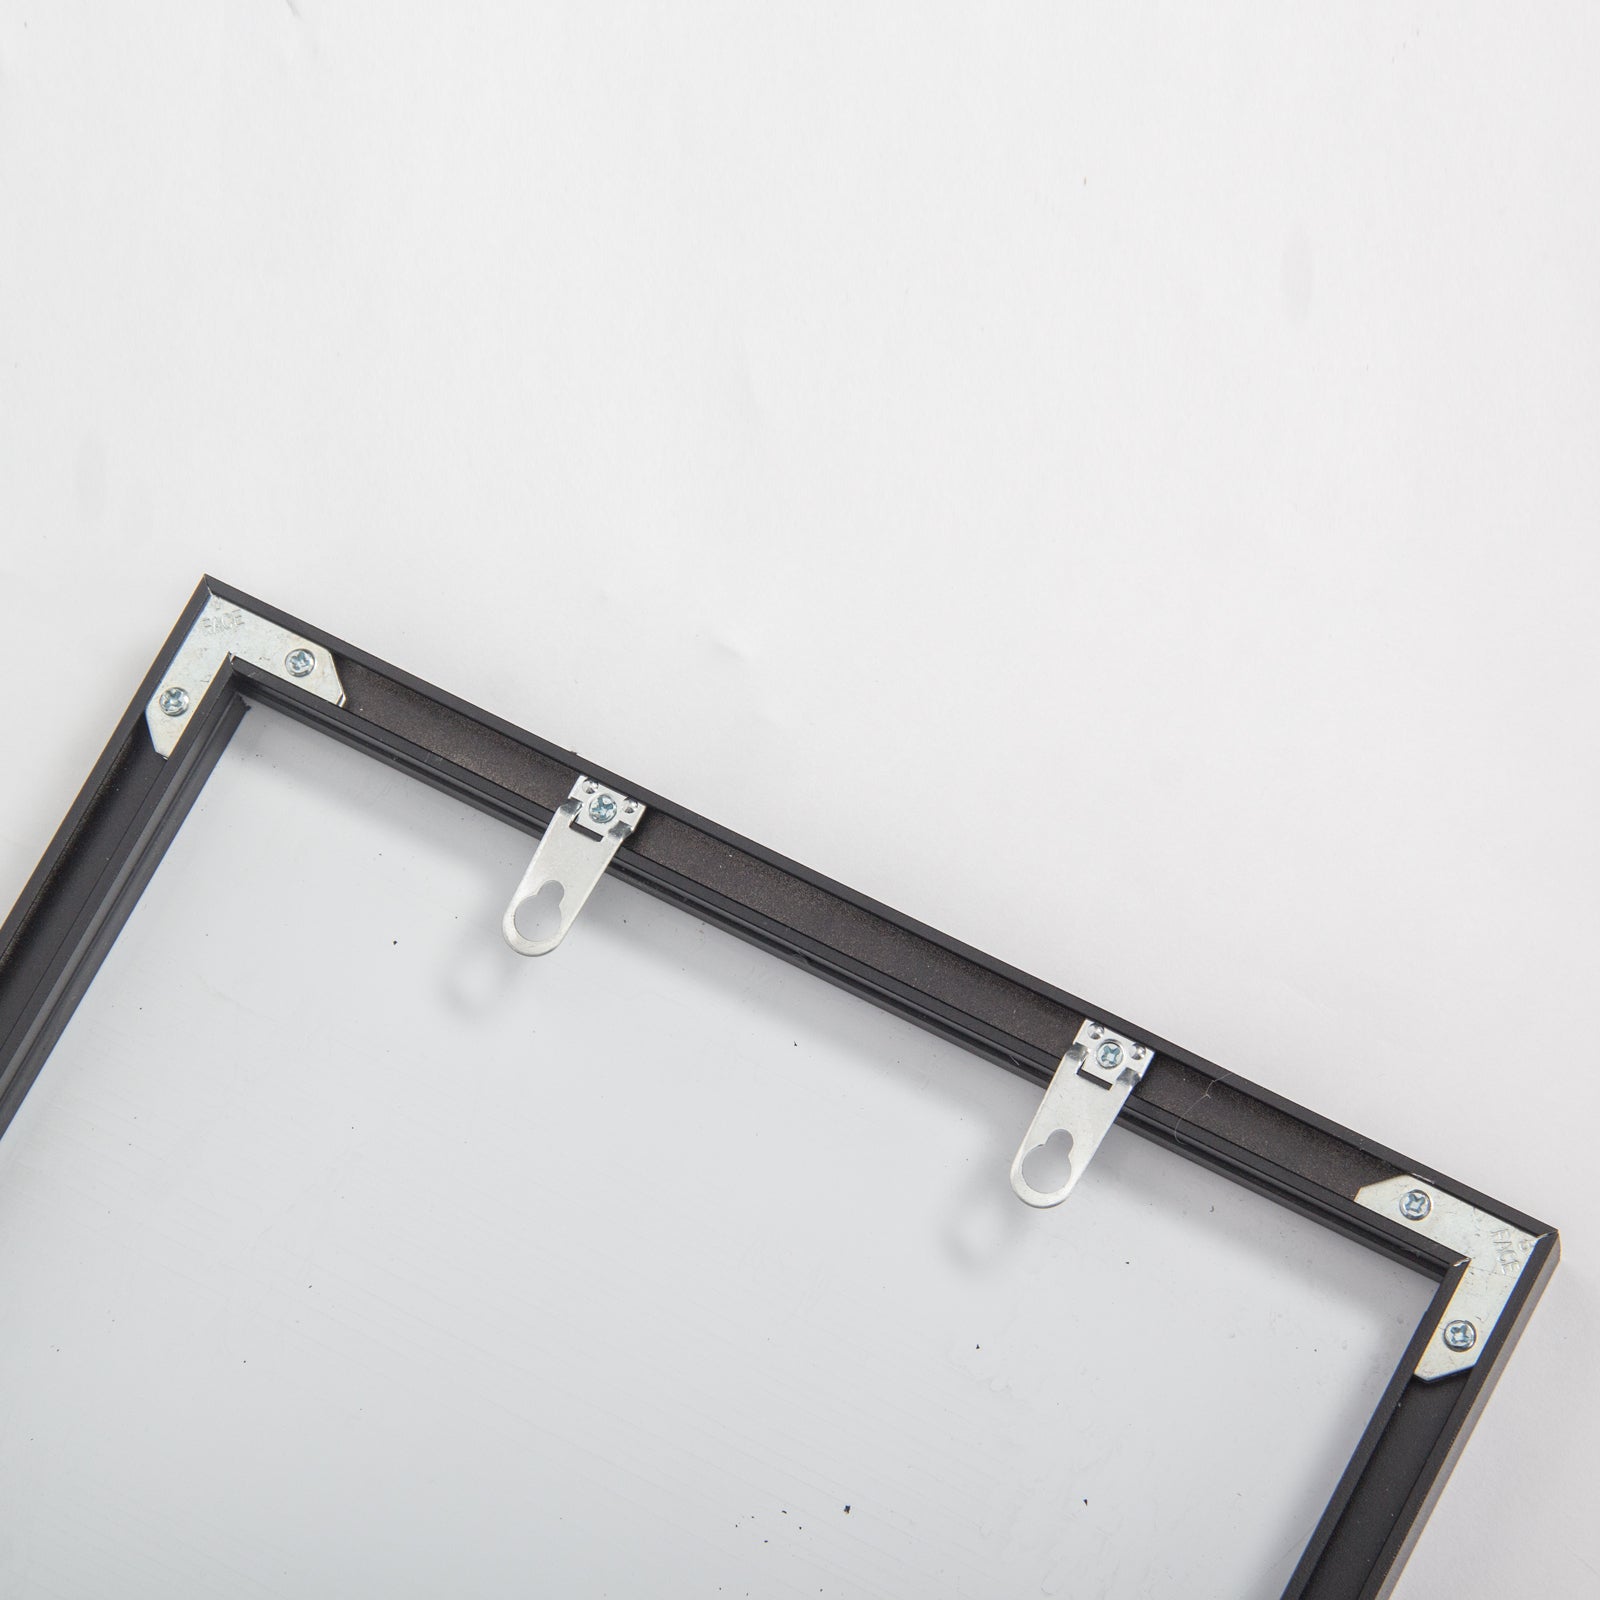 Full Length Mirror Hanging Standing or Leaning (Black)